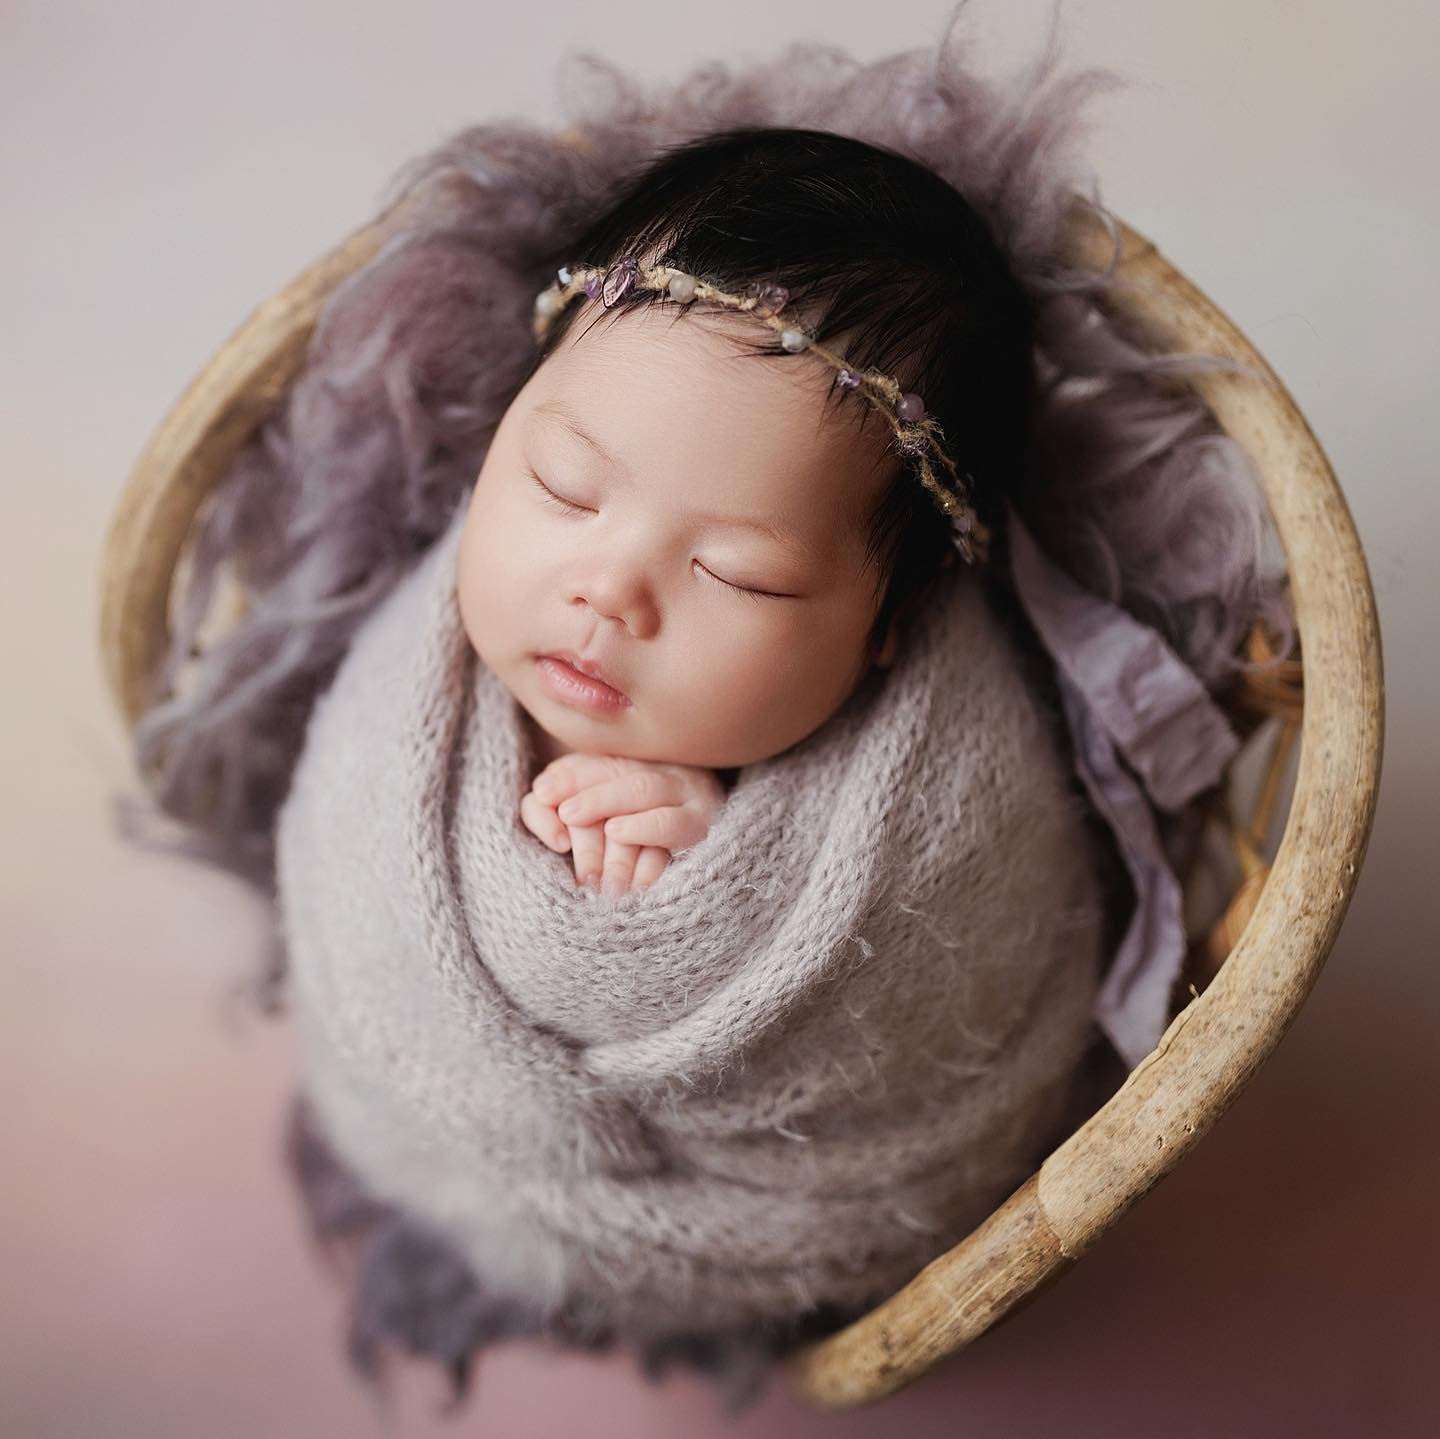 One month newborn baby session！Mom requested purple so here we are!

#frisconewbornphotographer
#planonewbornphotographer
#dallasnewbornphotographer #mckinneyphotographer
#lewisvillenewbornphotographer #newbornphotography
#newbornposing
#fortworthnew